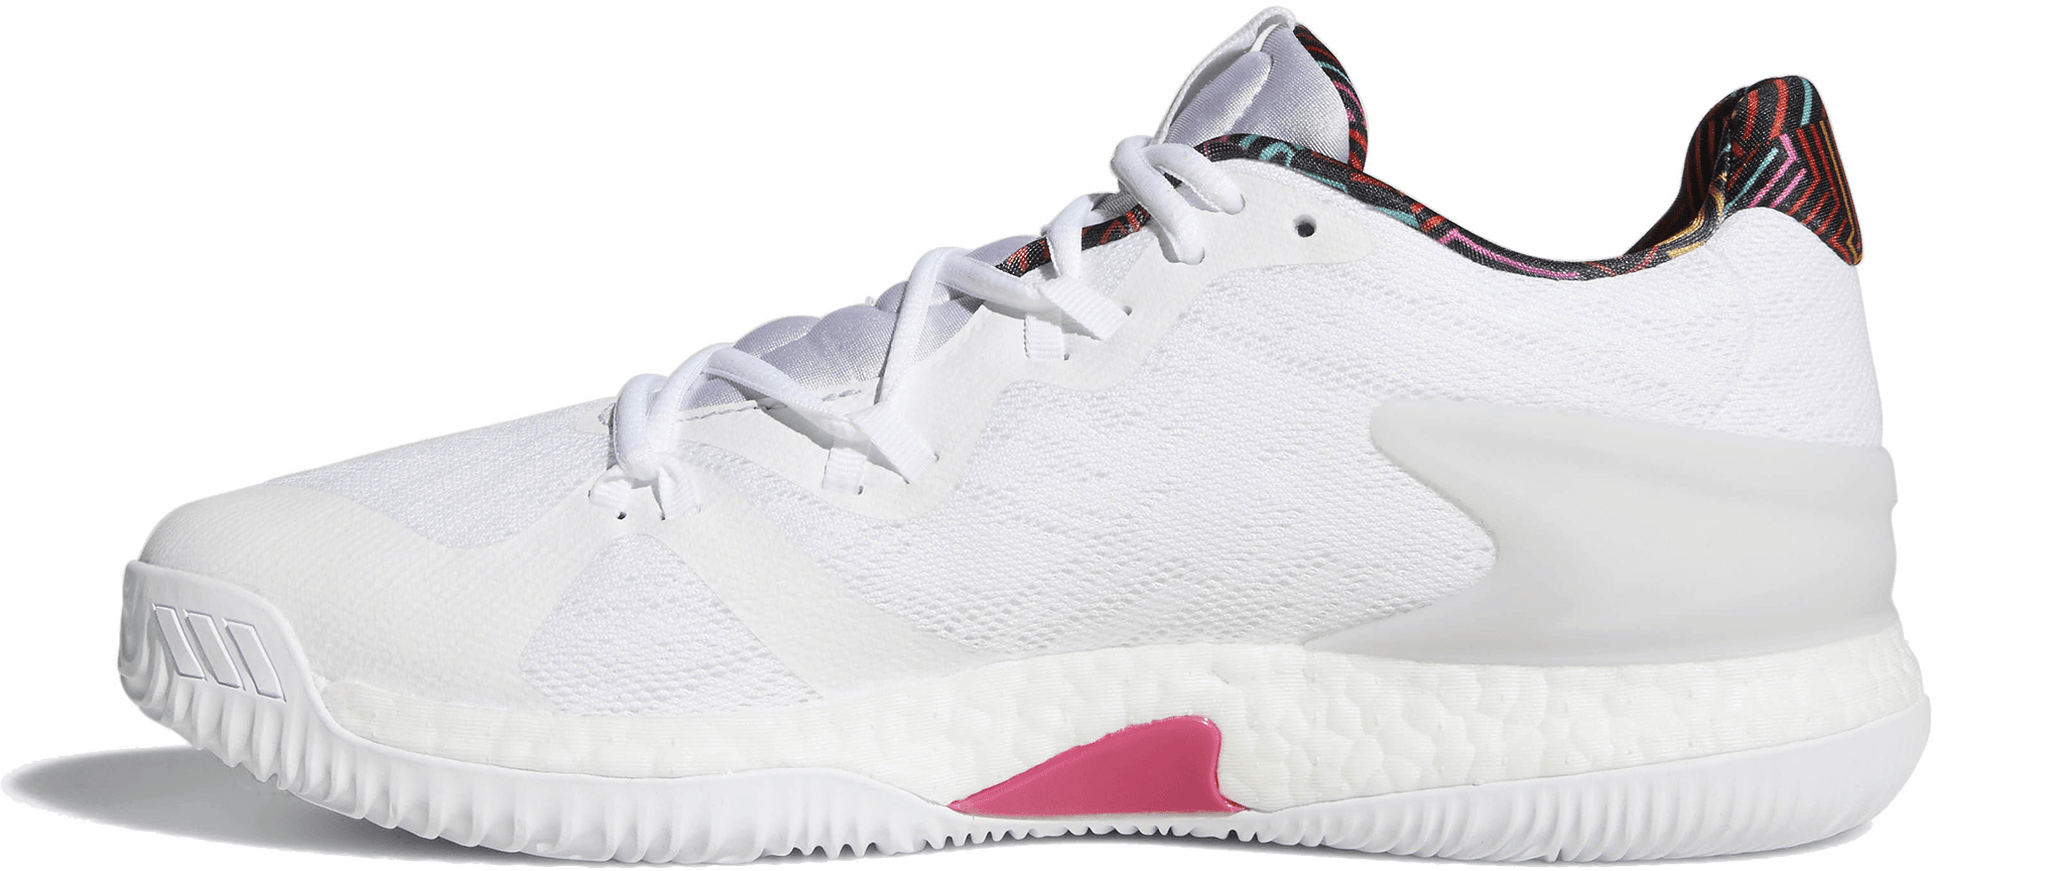 adidas crazylight boost 2018 performance review